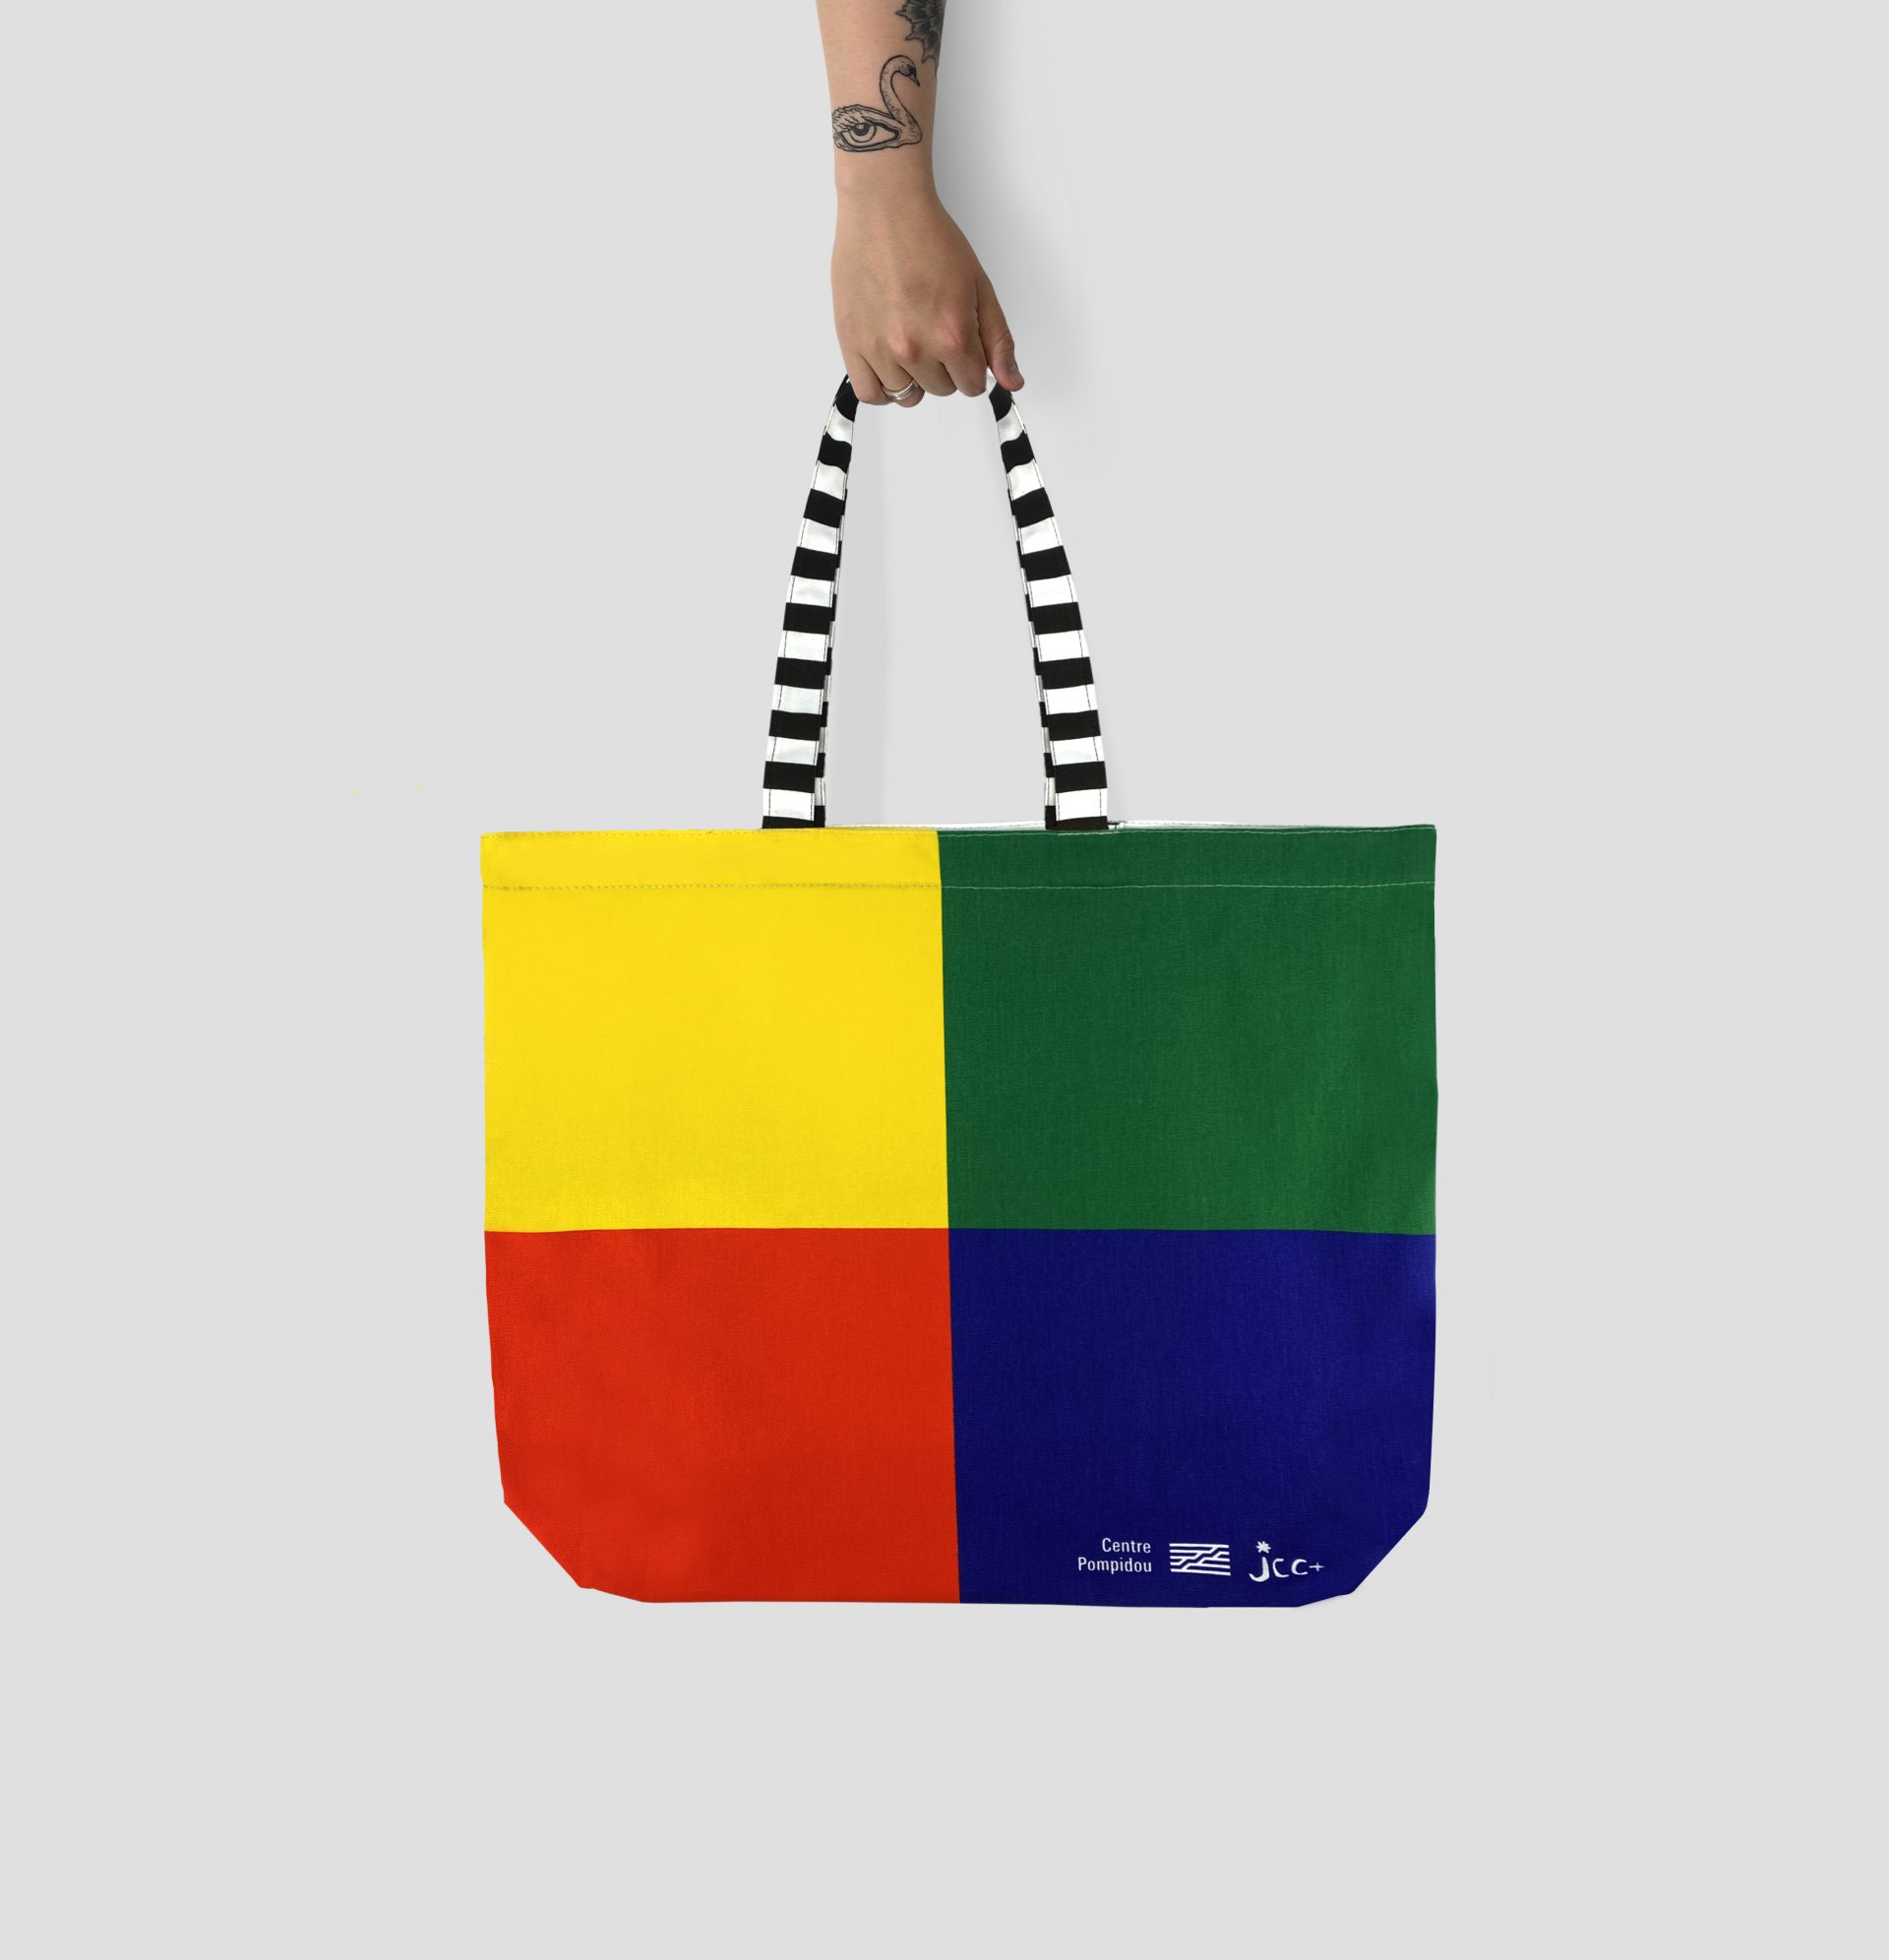 Bright colourful screen printing by Paul Bristows, large lined tote bag